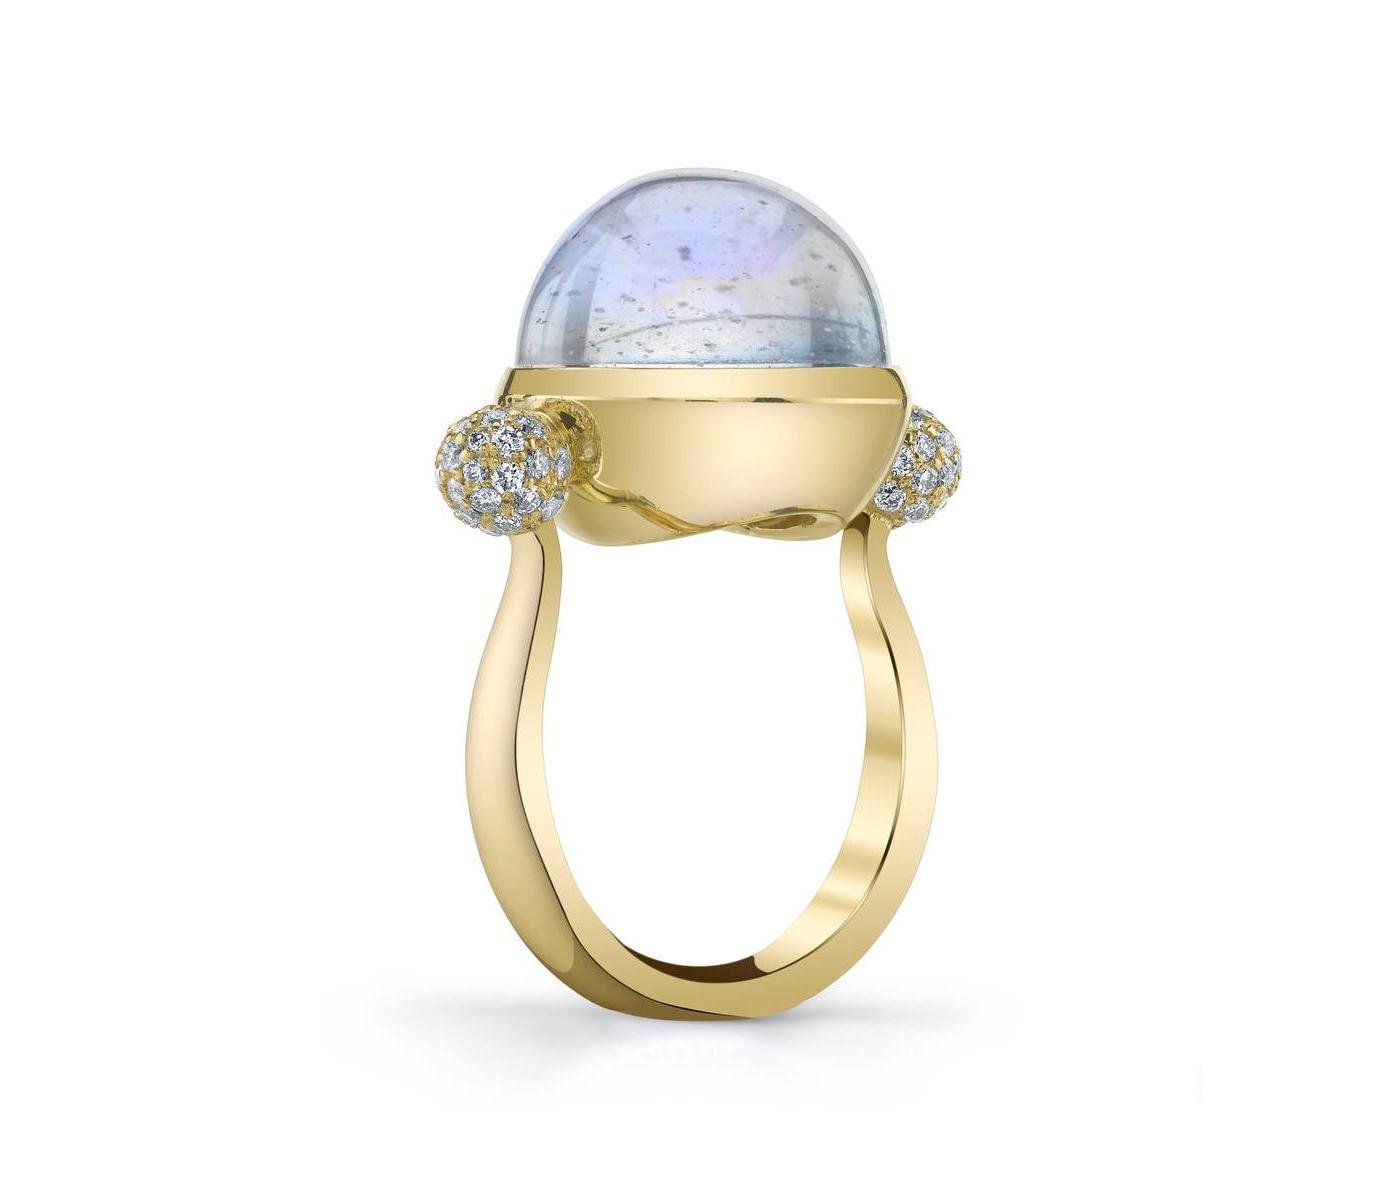 Ring by Ark